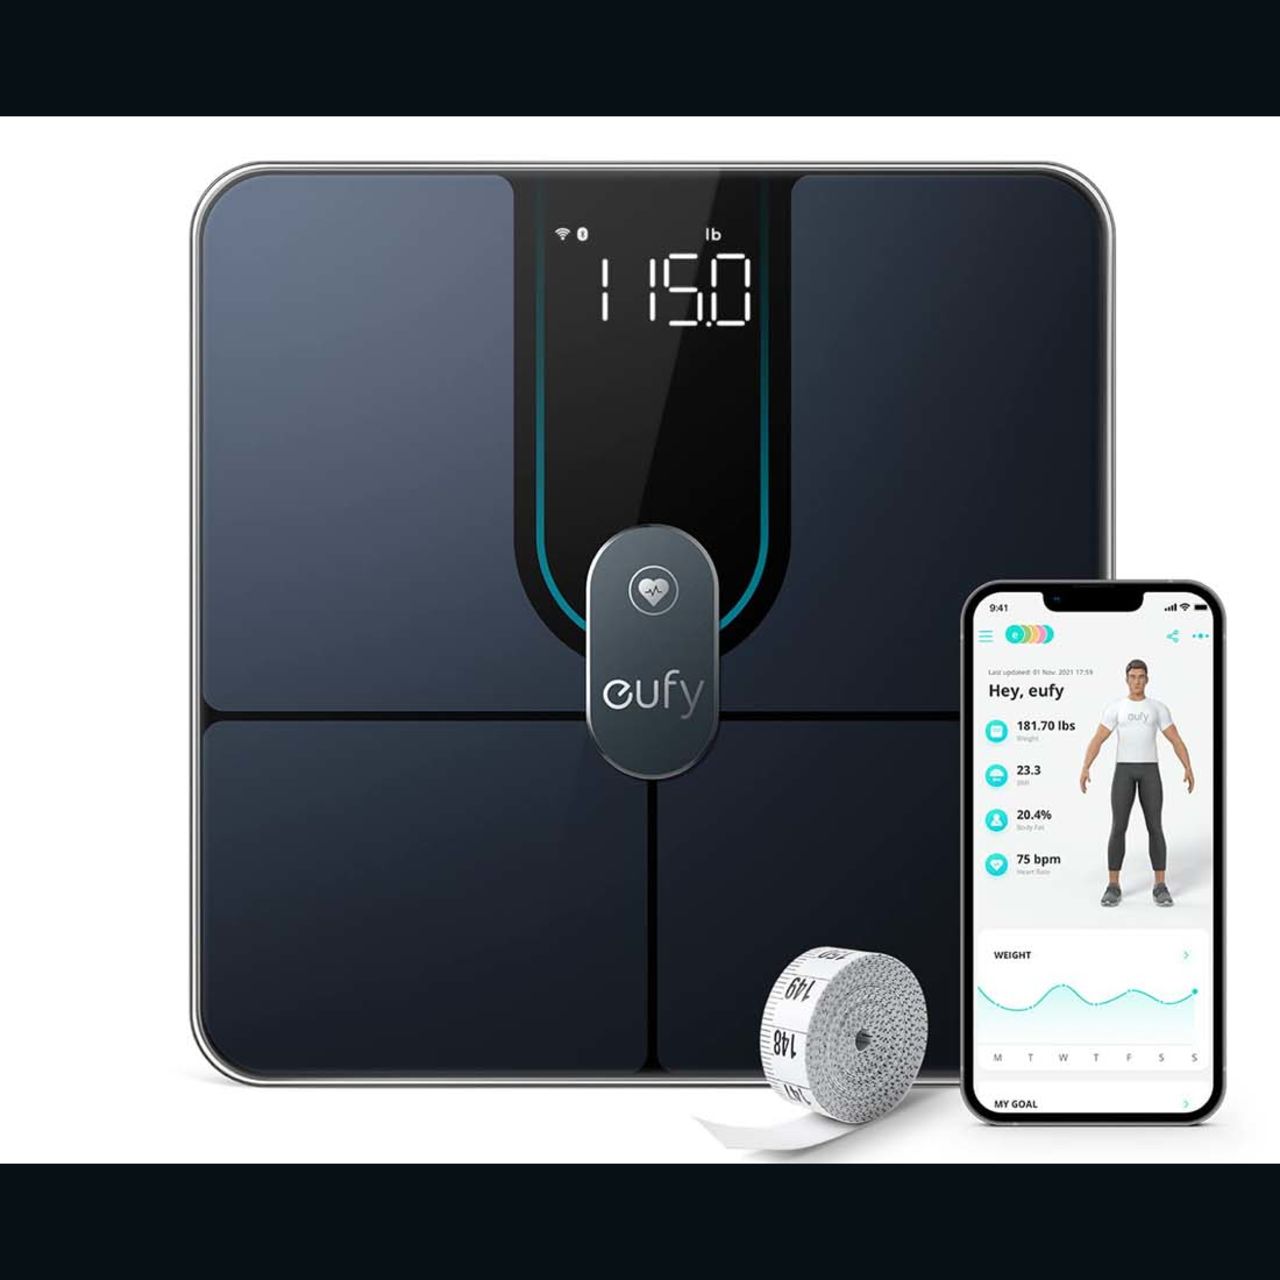 anyloop Smart Scale for Body Weight and Fat Percentage, Highly Accurate  Digital Bathroom Scales for BMI Muscle Body Fat, 14 Body Composition  Monitor